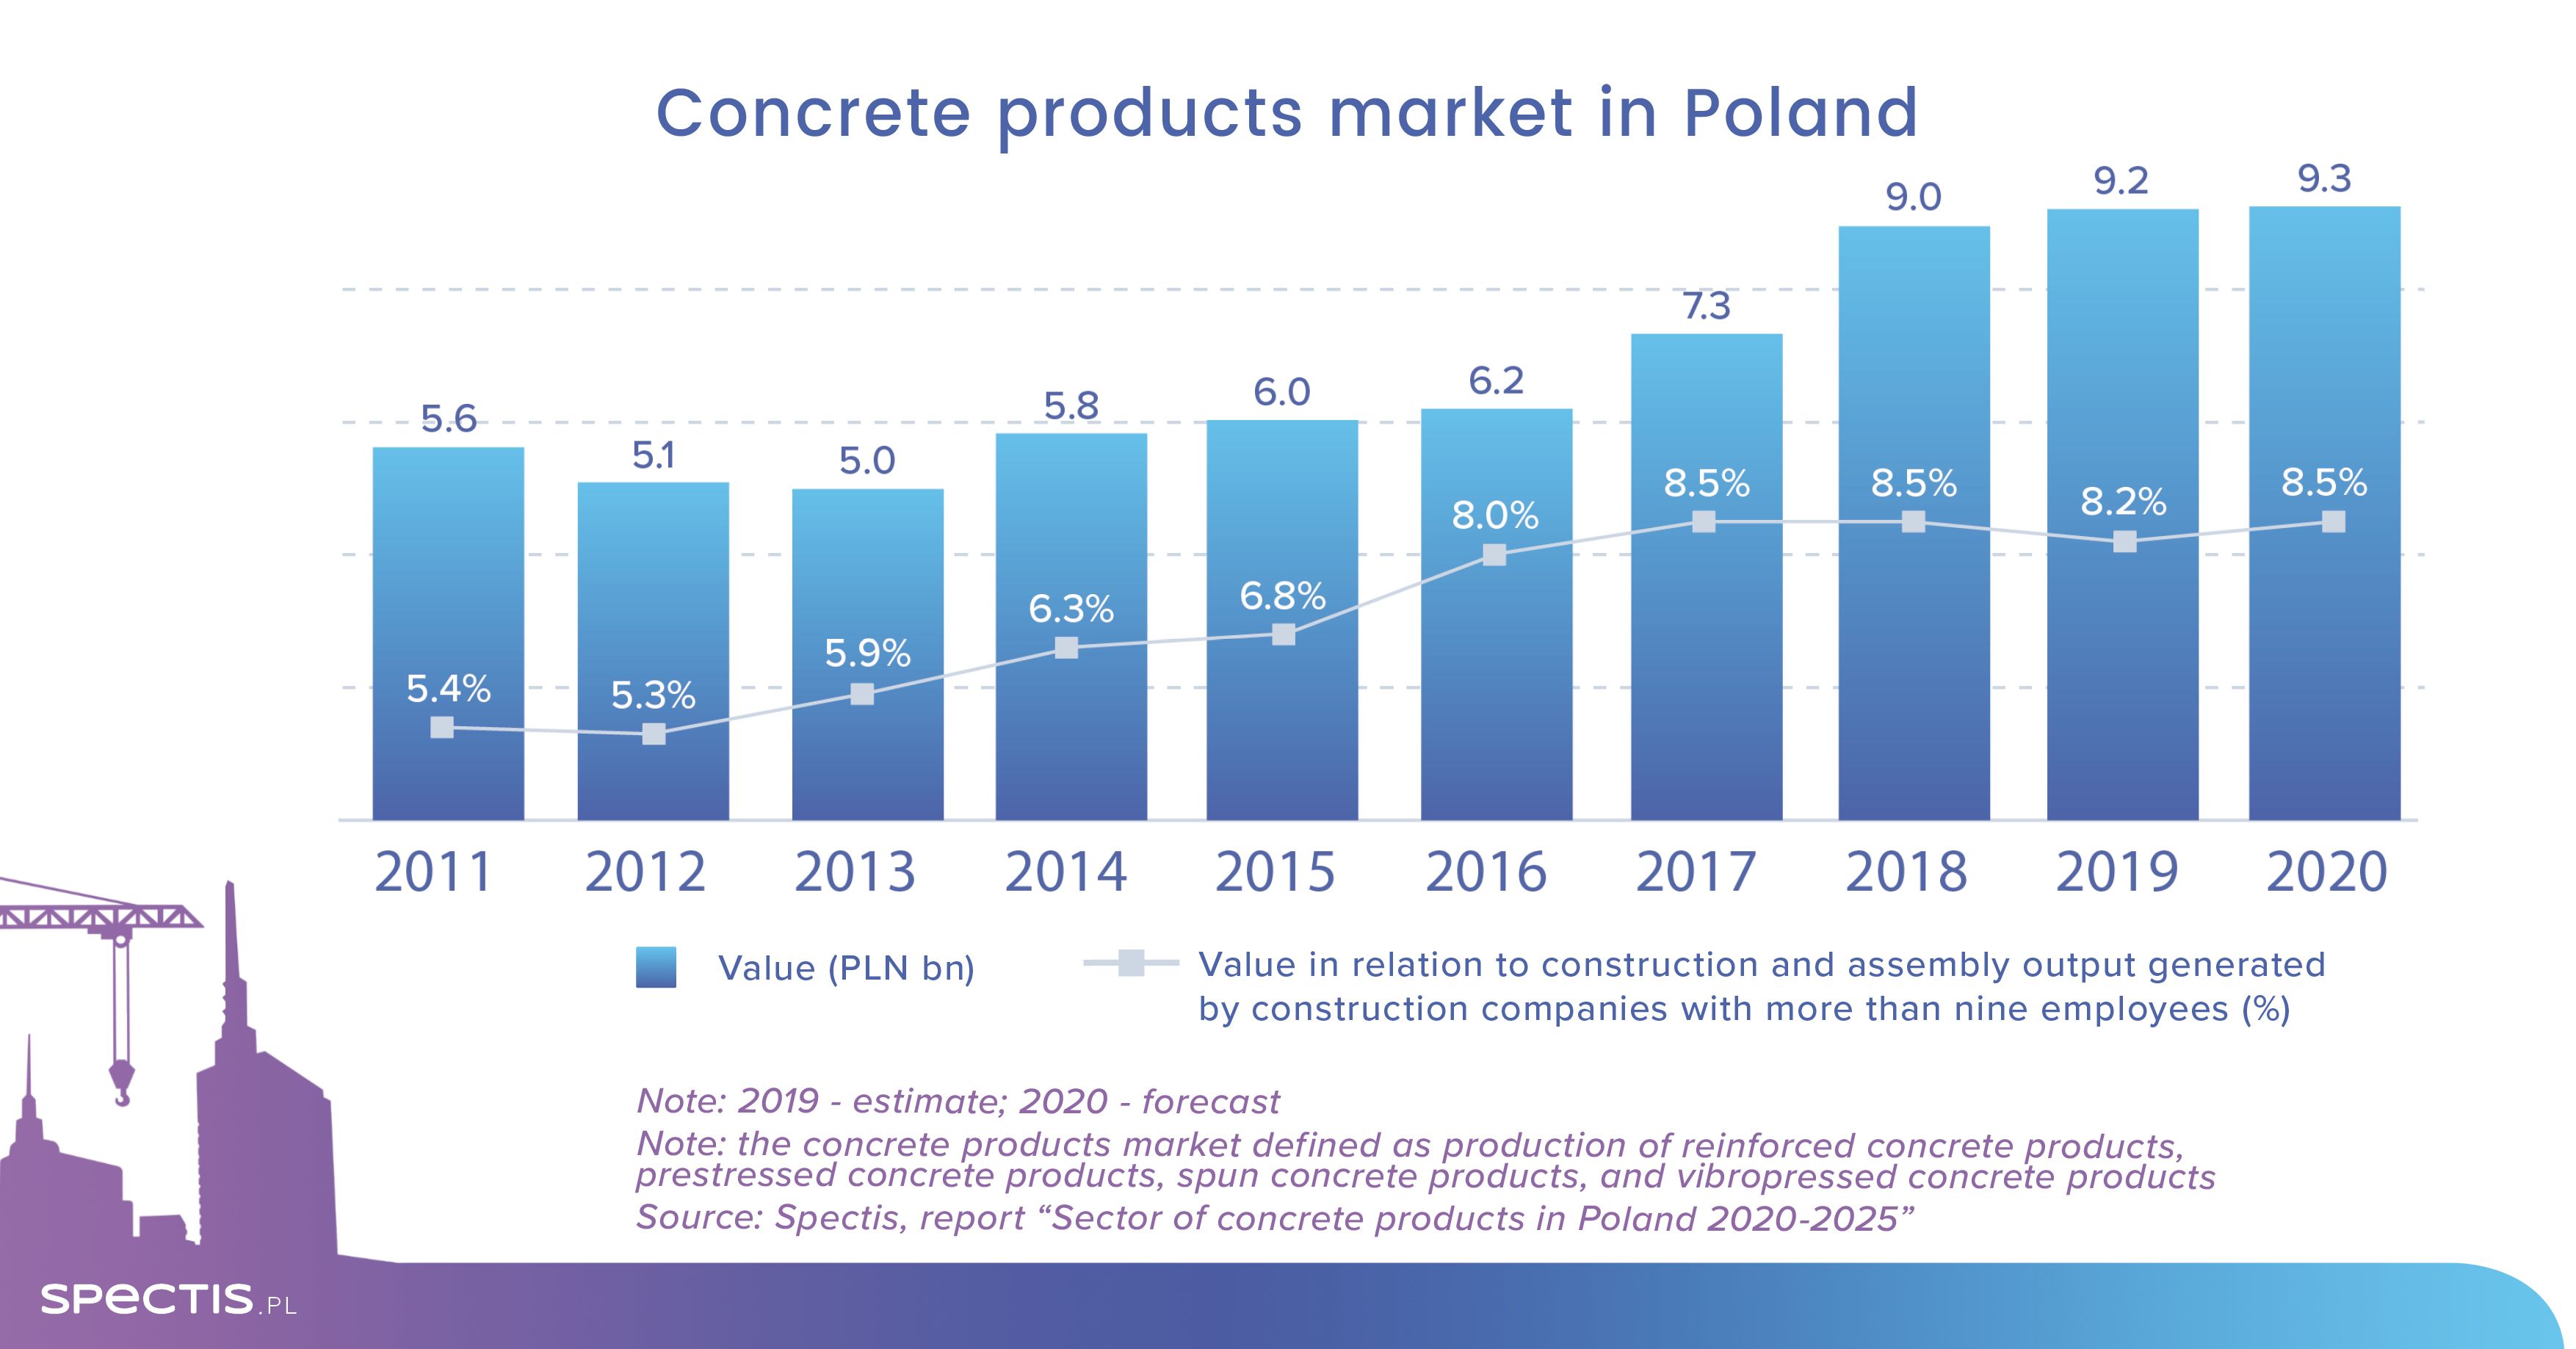 Concrete products market in Poland to reach PLN 10bn by 2022